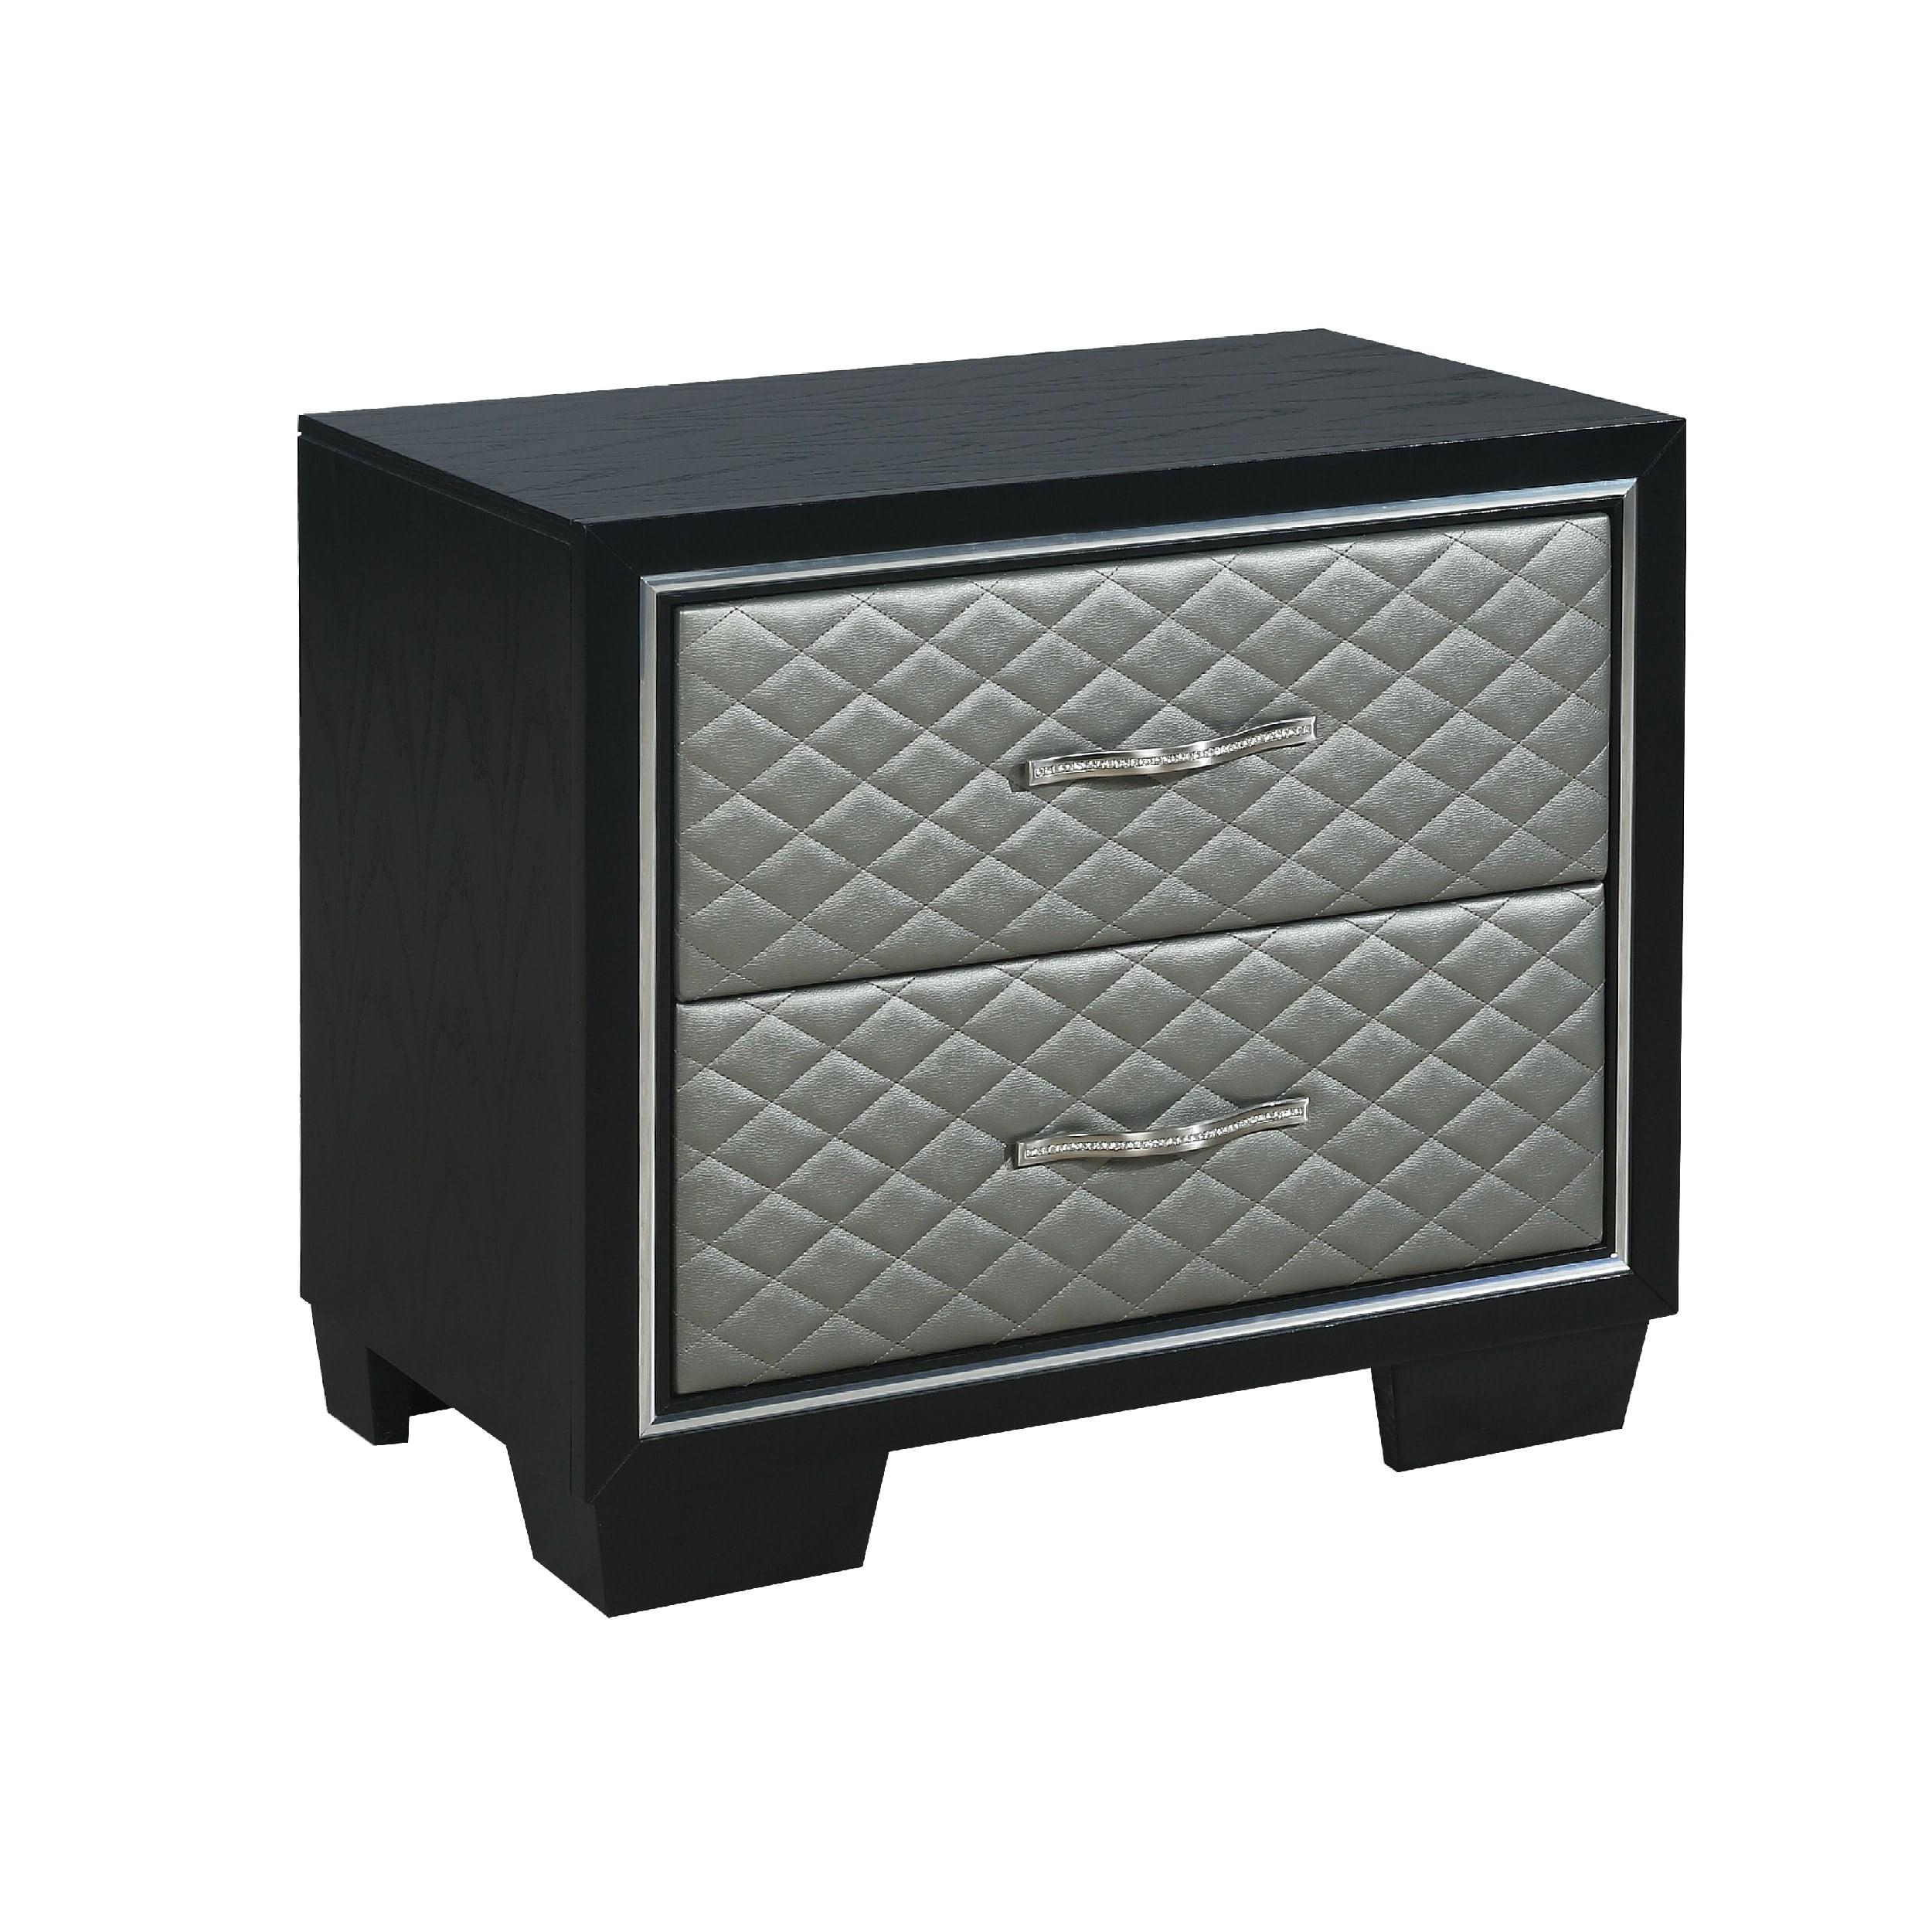 Elegant Black Poplar Wood Nightstand with Silver Faux Leather Drawers